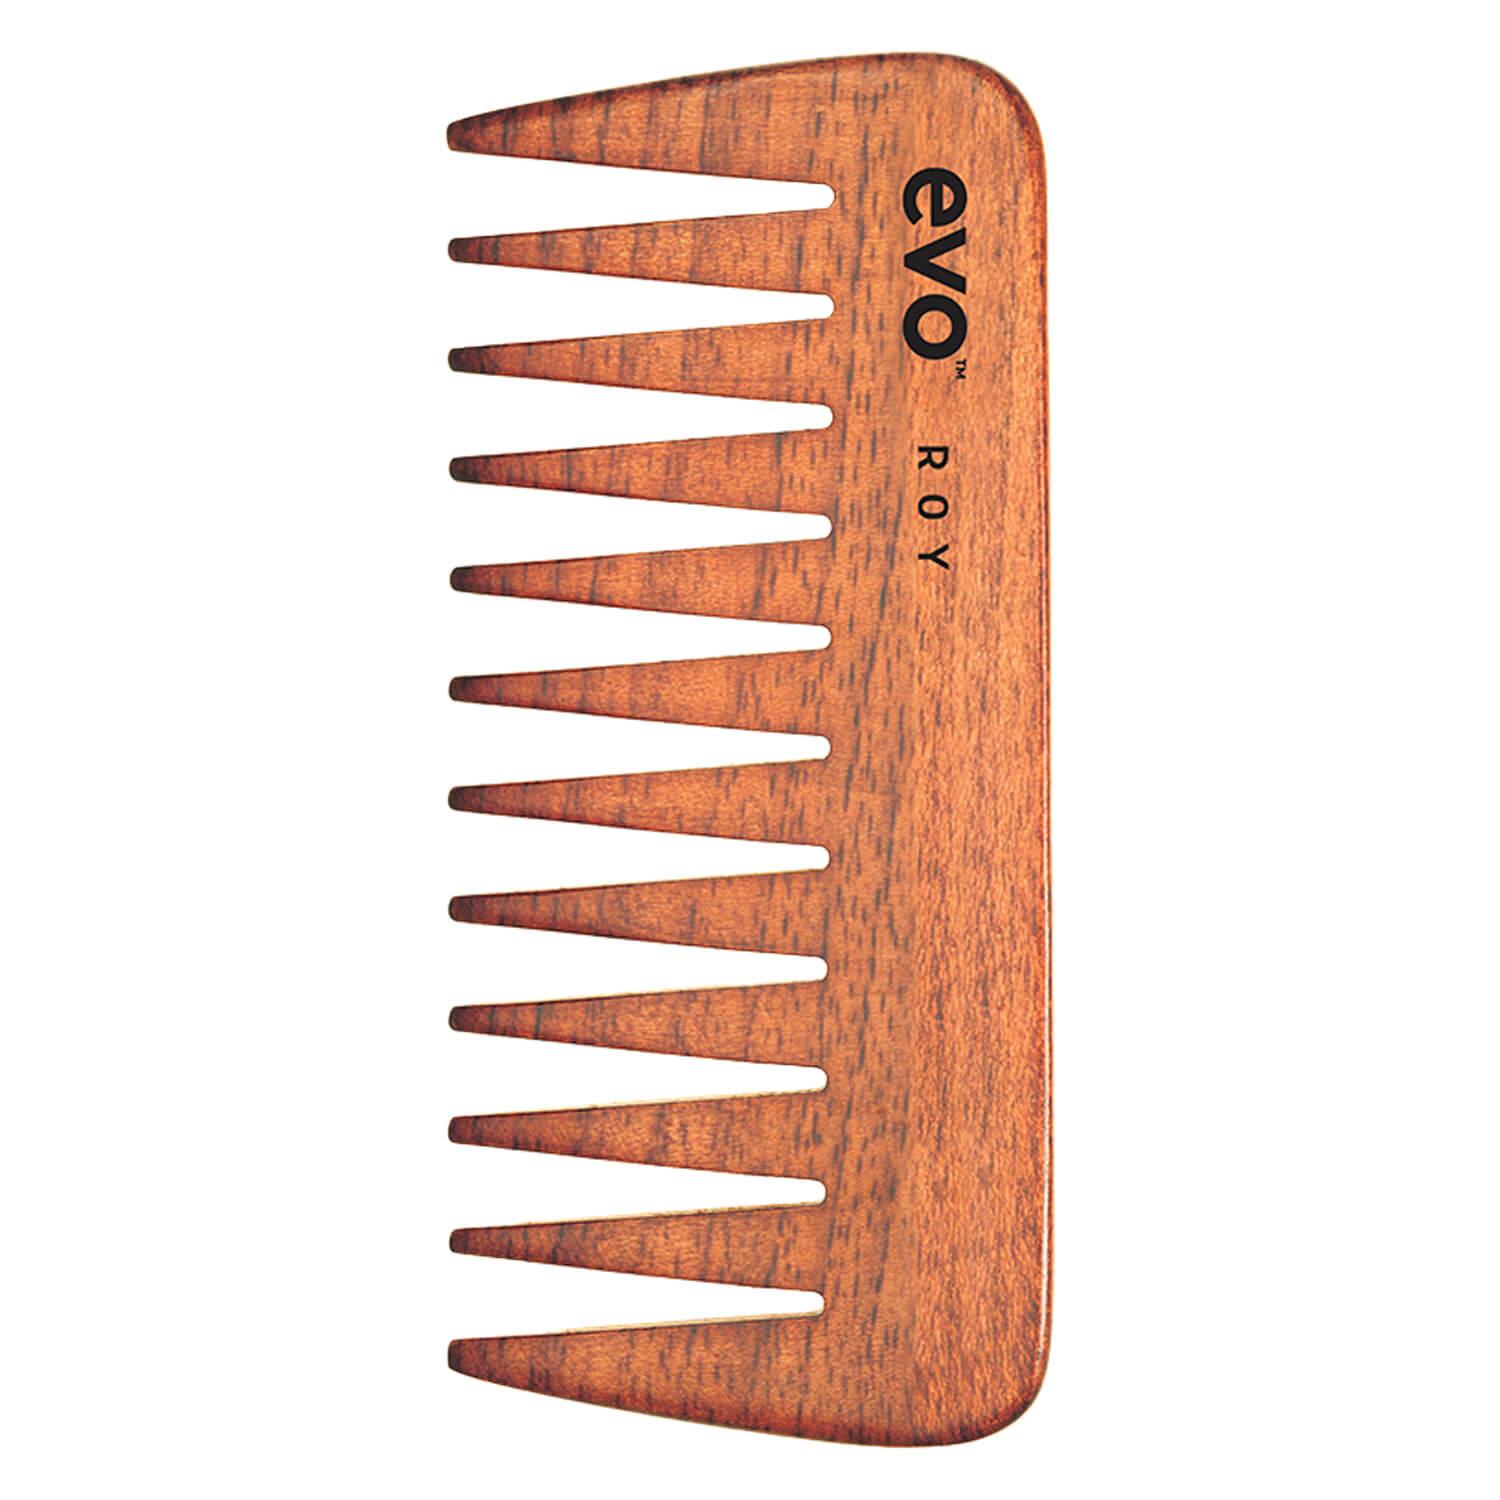 evo brushes - roy wide-tooth comb